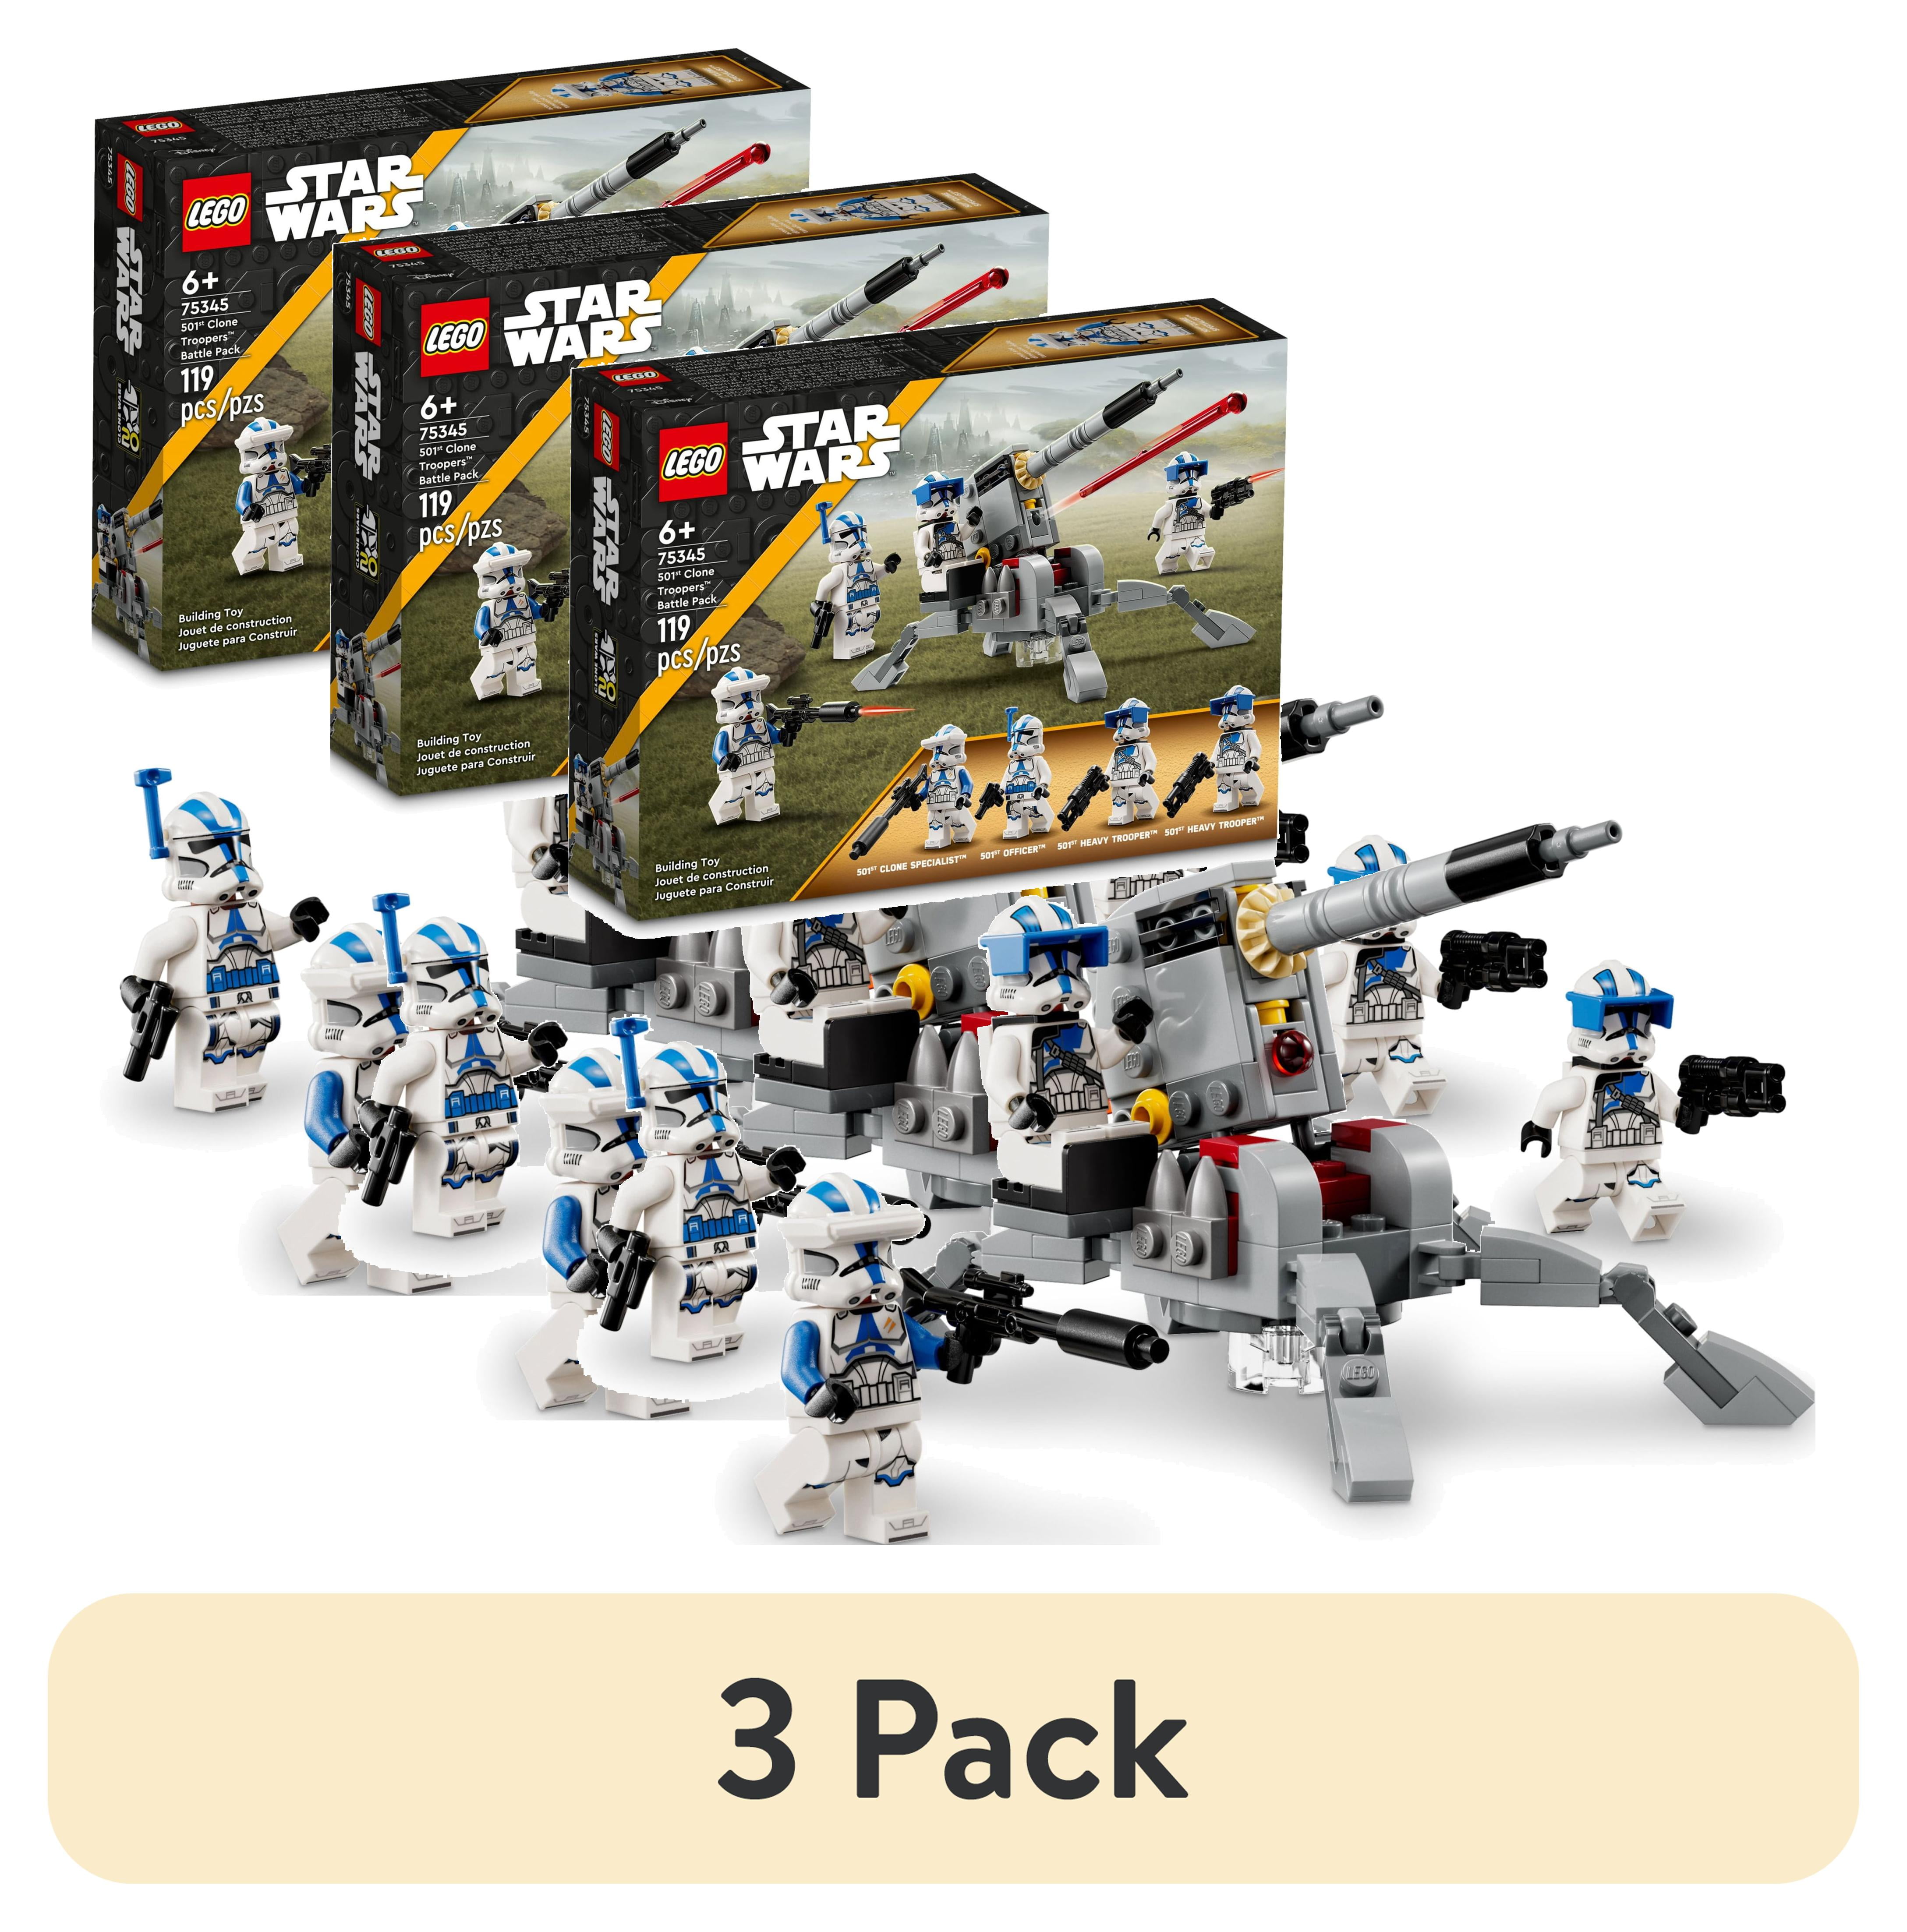 3 pack) LEGO Star Wars 501st Clone Troopers Battle Pack Set 75345 